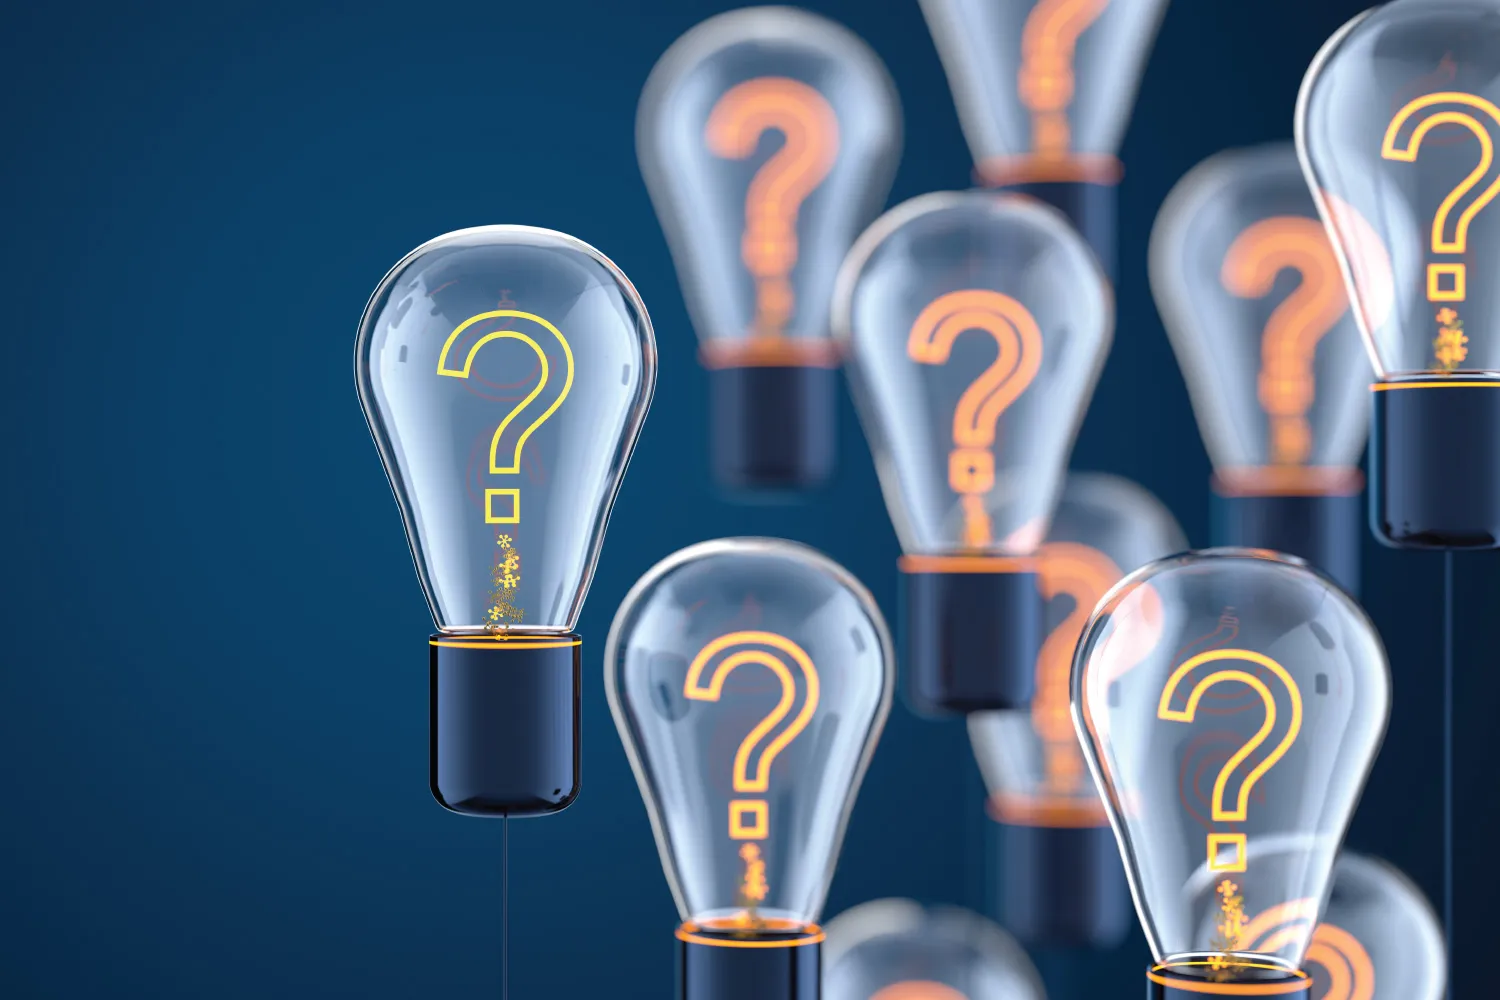 Key Considerations when Selecting the Right MSP for a group of light bulbs with question marks on them.